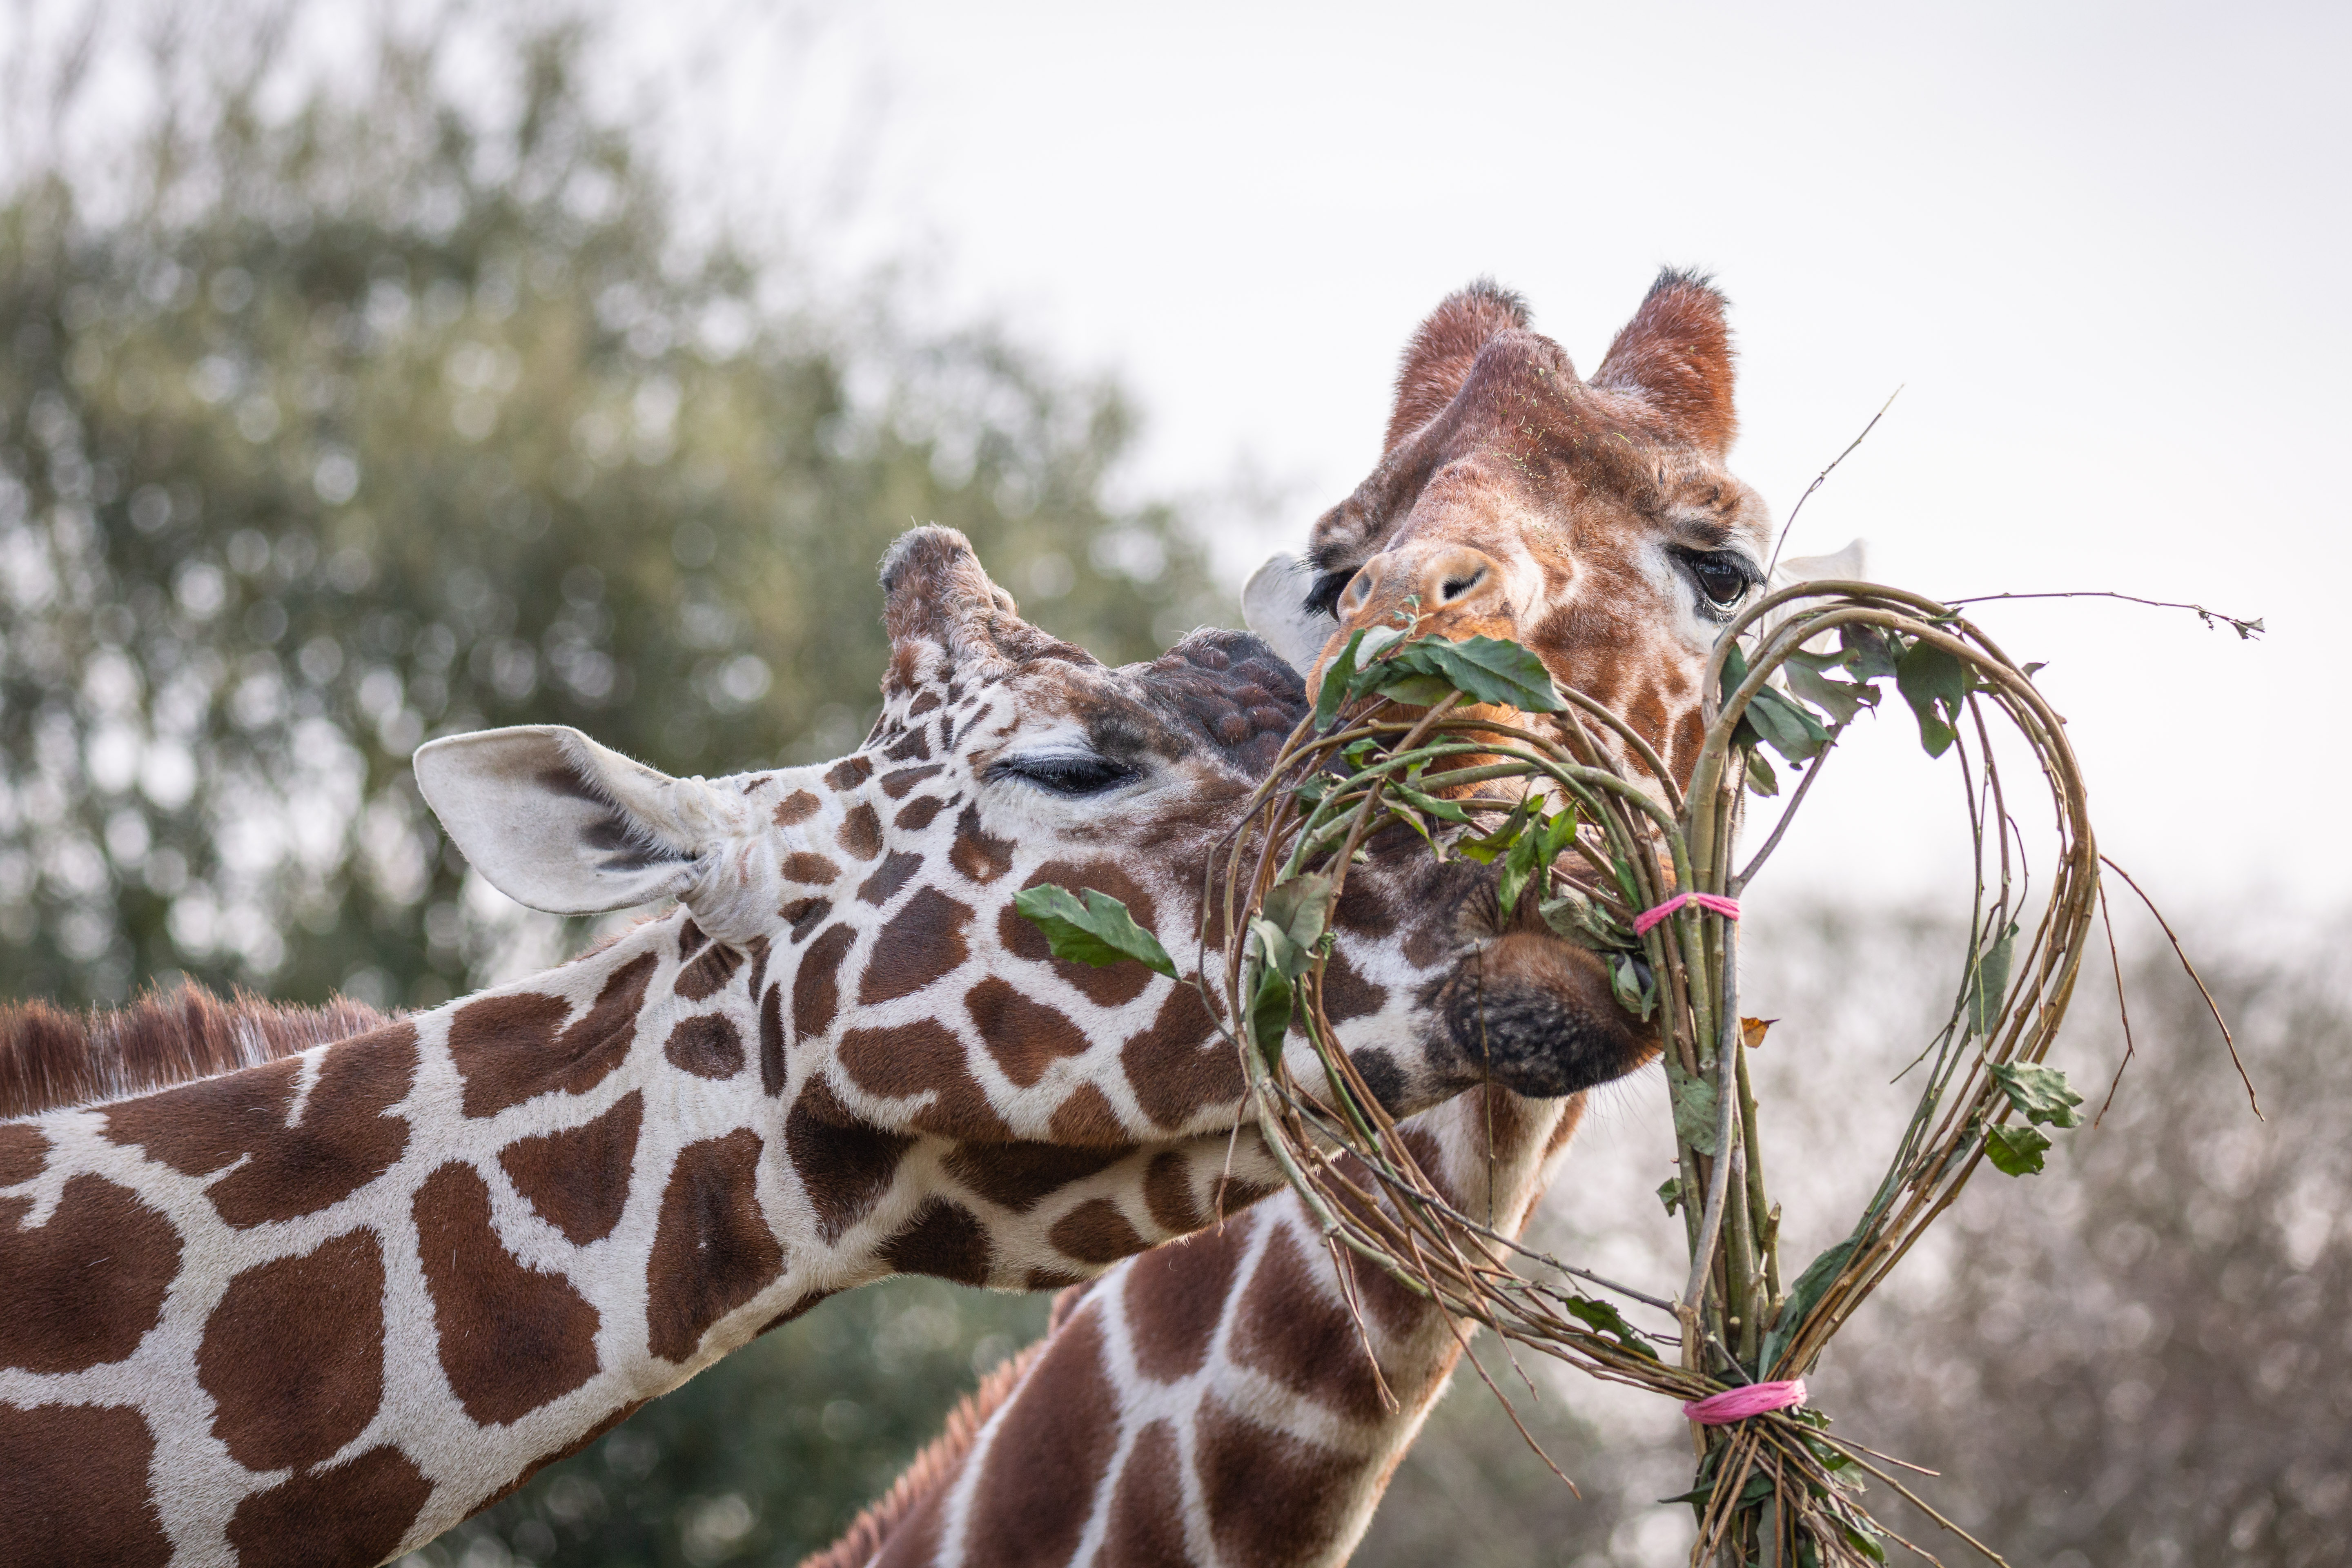 Giraffes were given their favourite meal of willow and cotoneaster branches, woven together to form a romantic heart garland. 